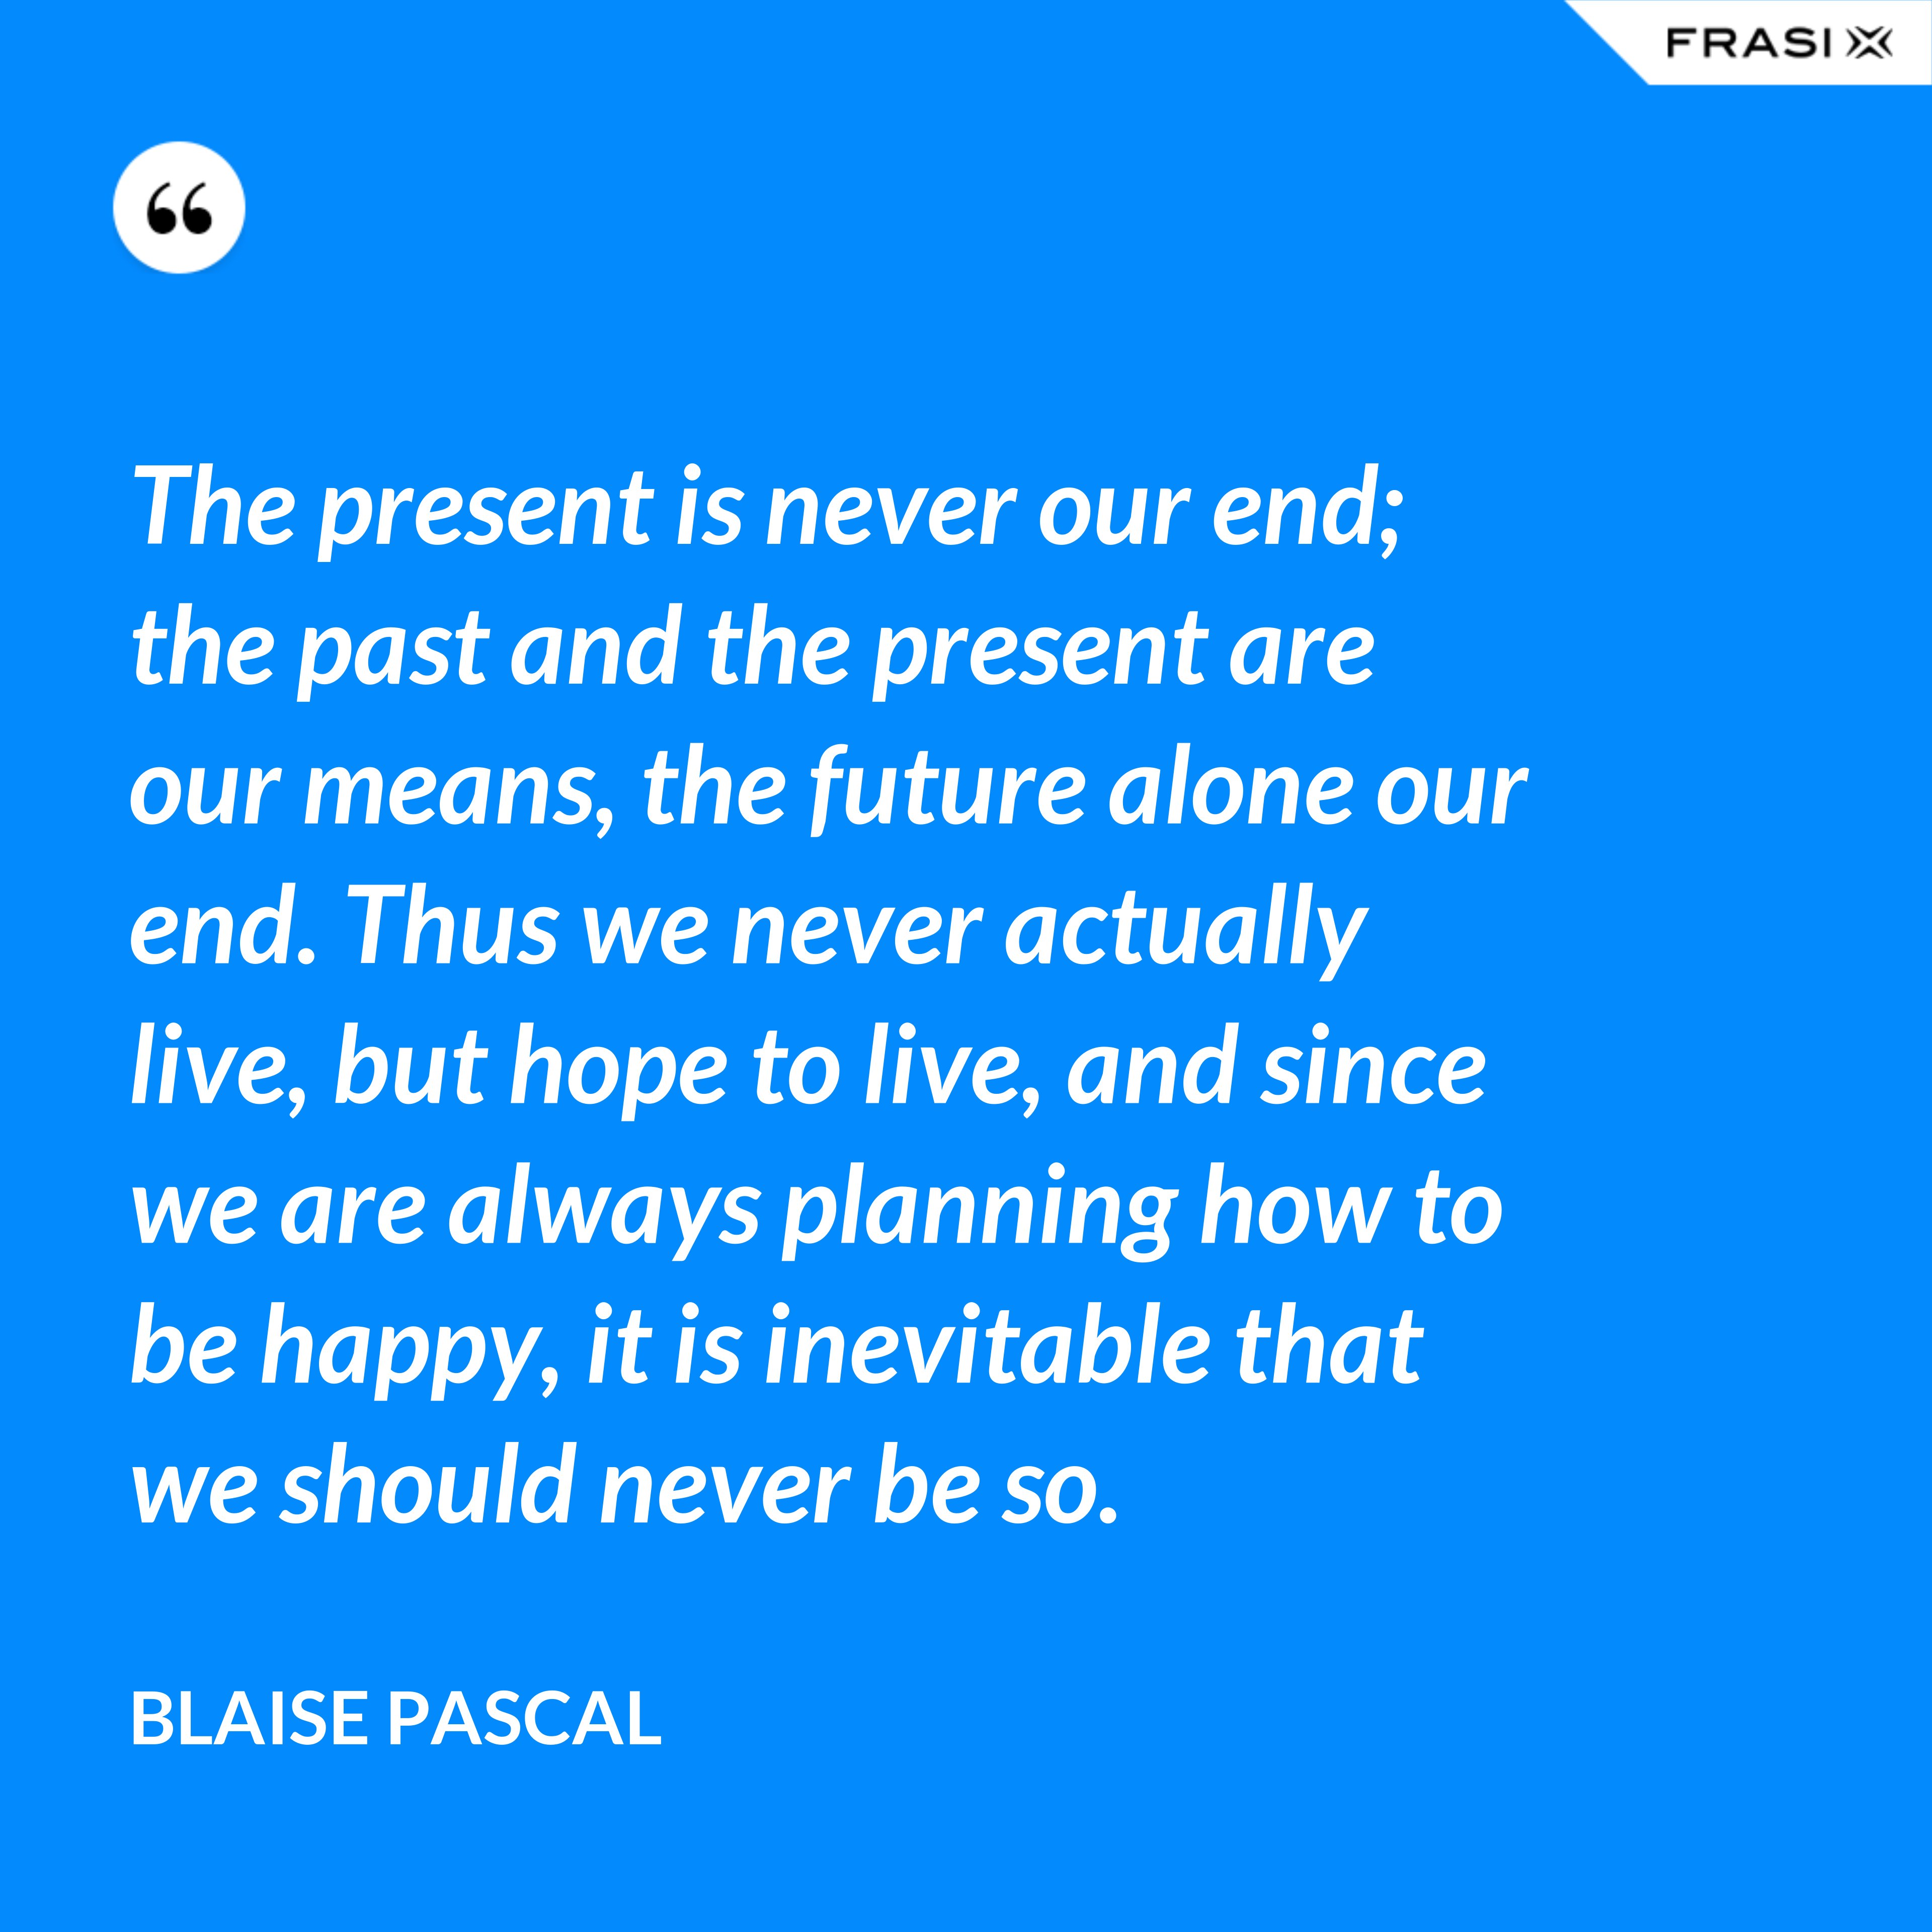 The present is never our end; the past and the present are our means, the future alone our end. Thus we never actually live, but hope to live, and since we are always planning how to be happy, it is inevitable that we should never be so. - Blaise Pascal